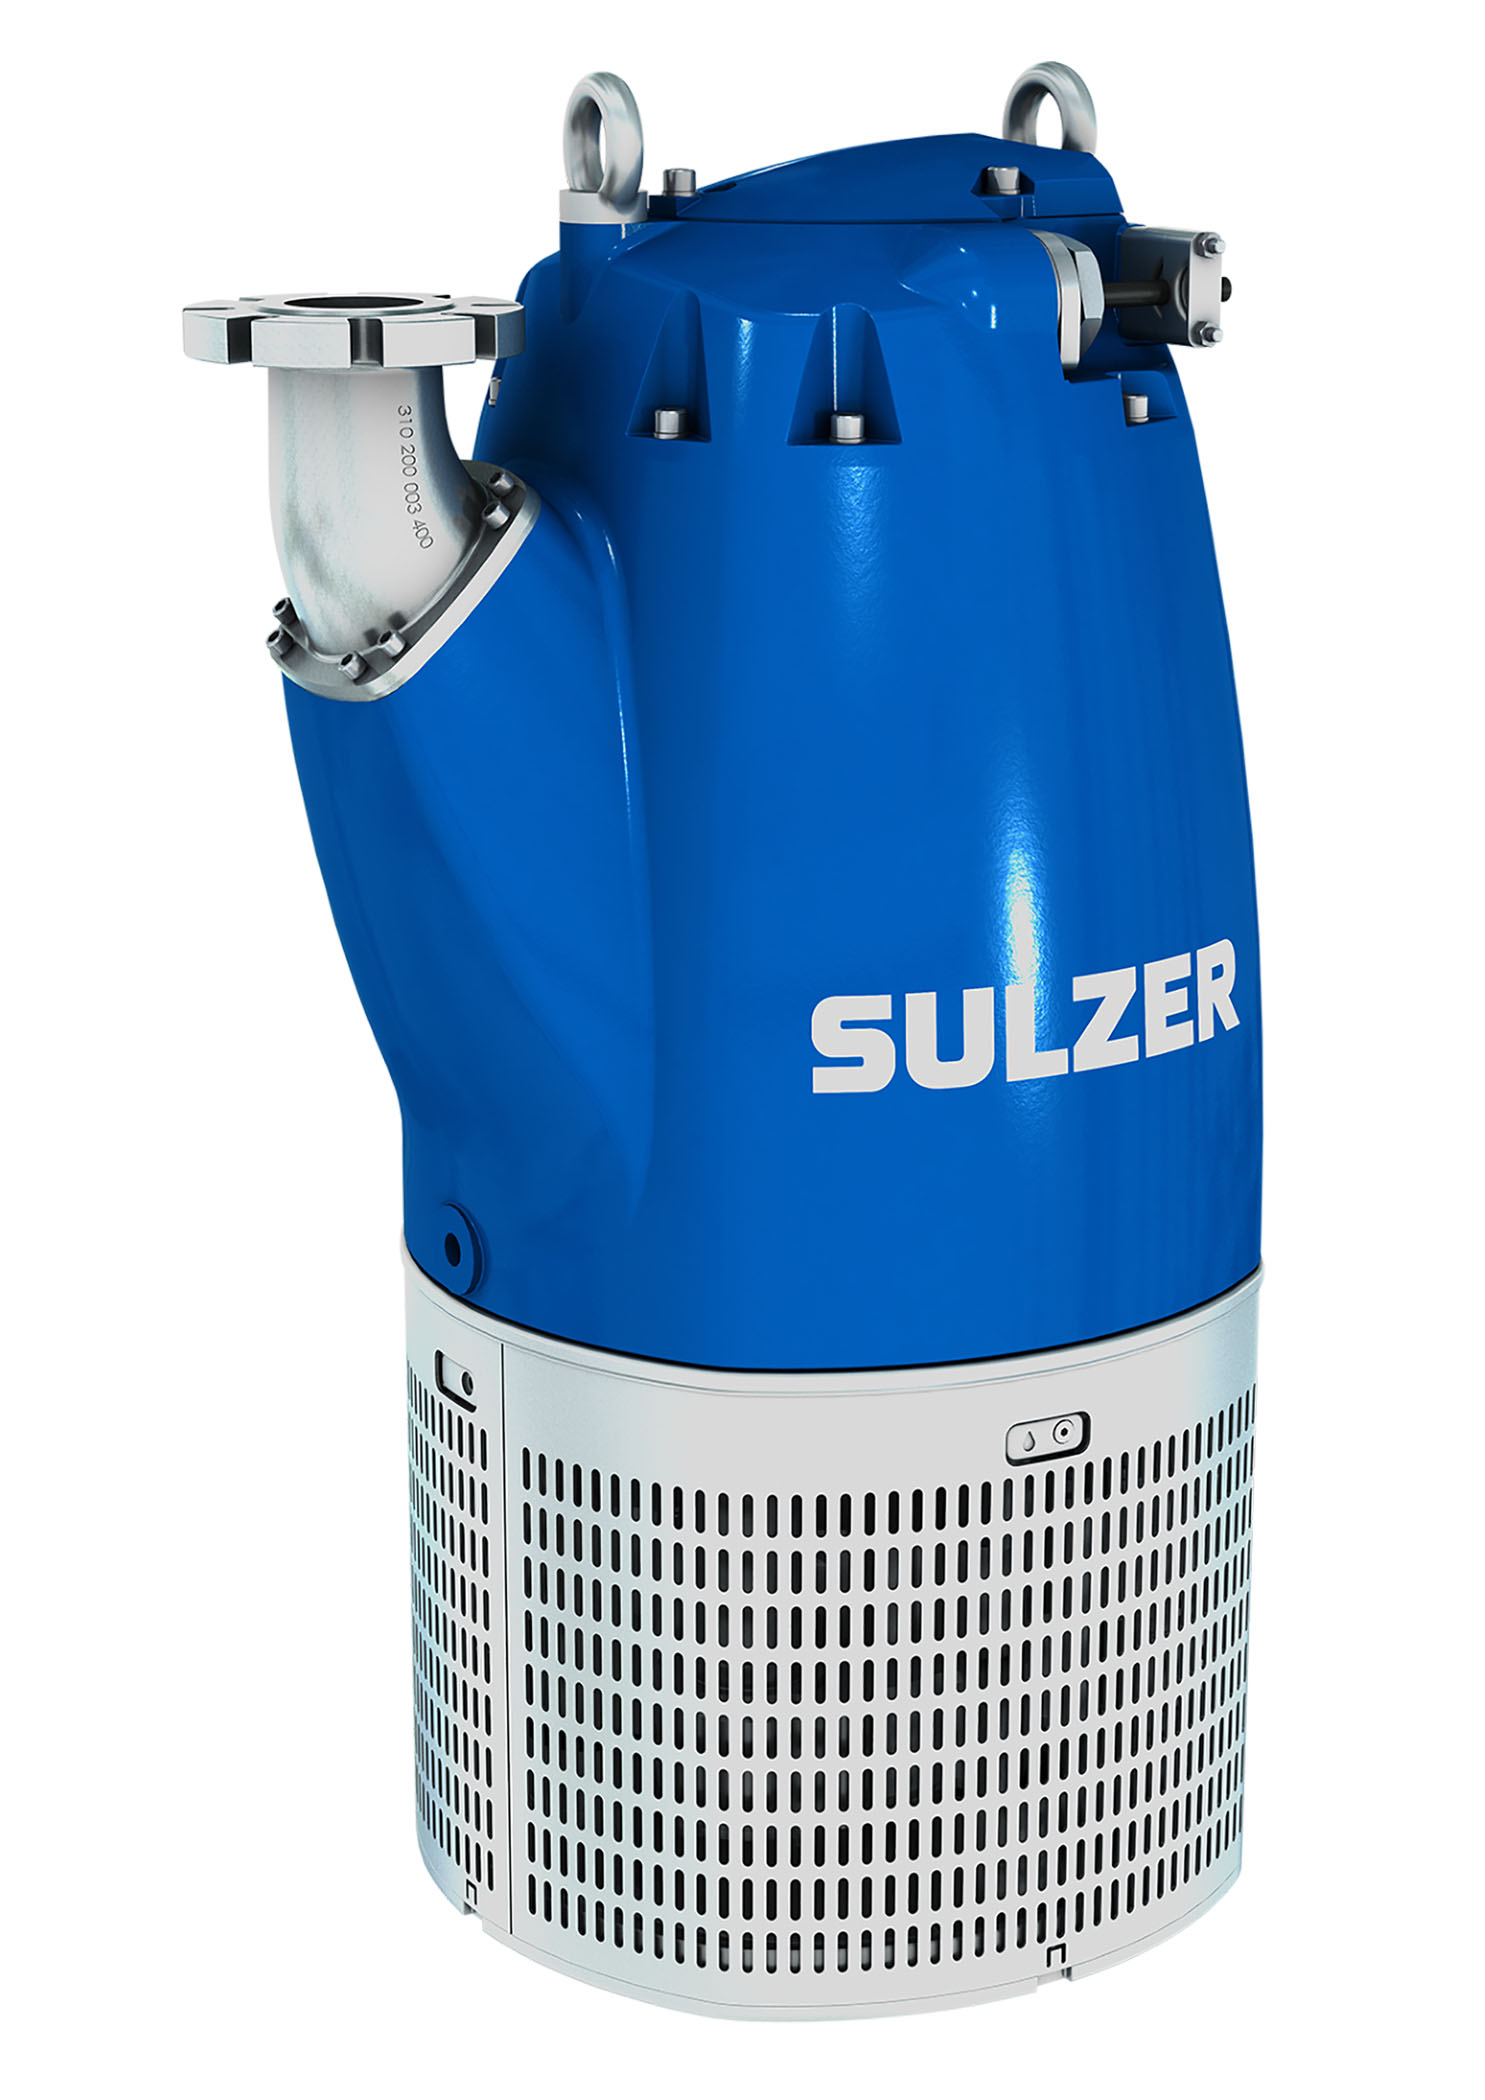 Sulzer’s award-winning XJ 900 submersible dewatering pump is ideal for industries such as mining, tunneling and construction.